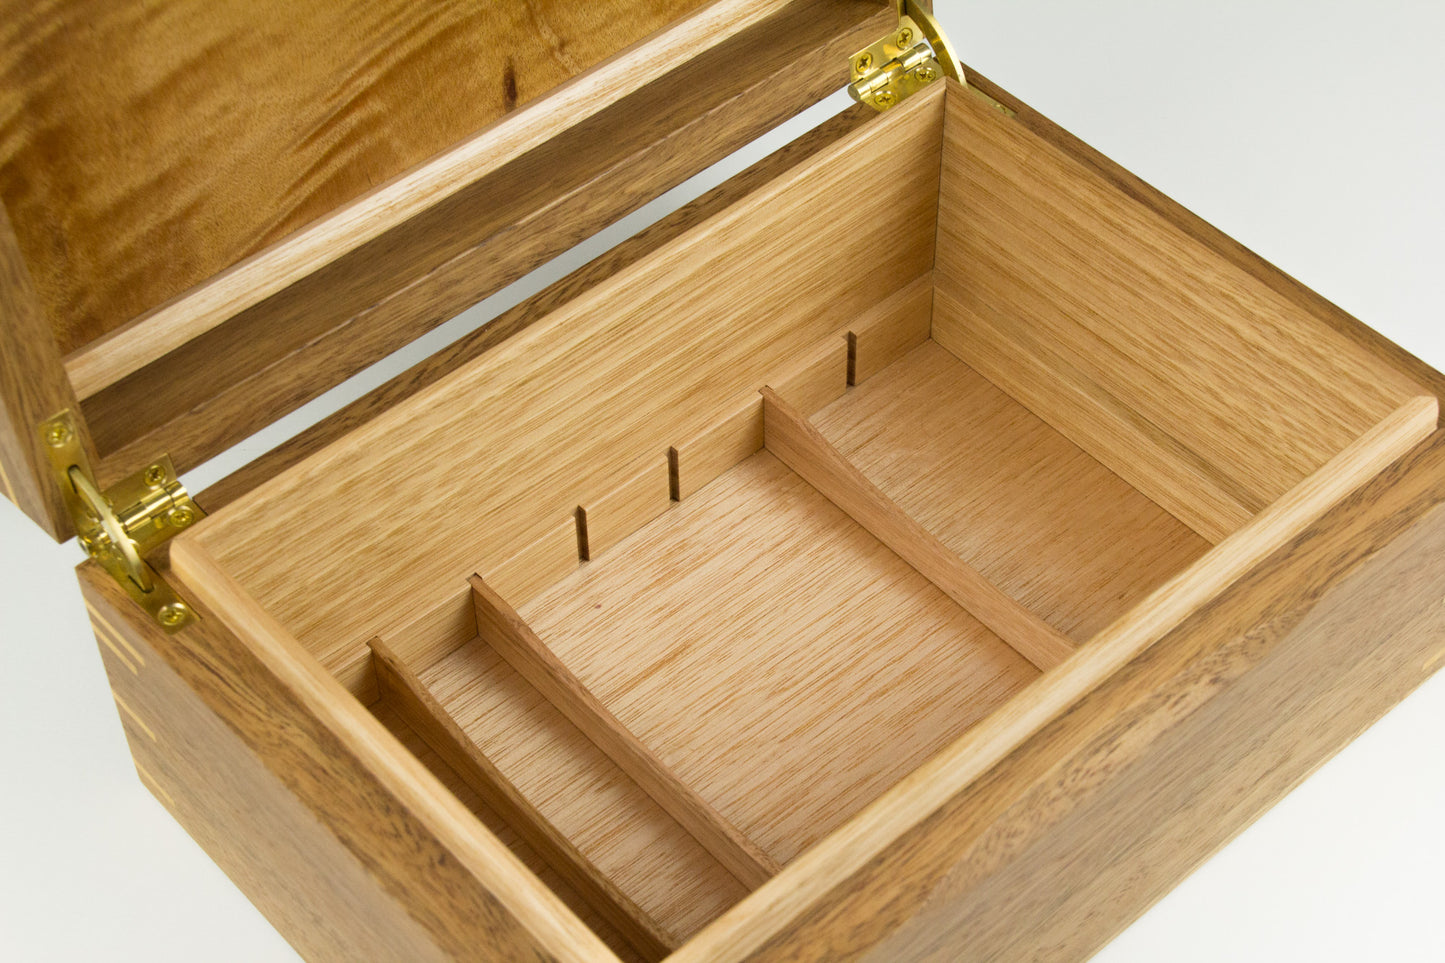 Jewellery Box handcrafted from Spotted Gum and Tasmanian Oak